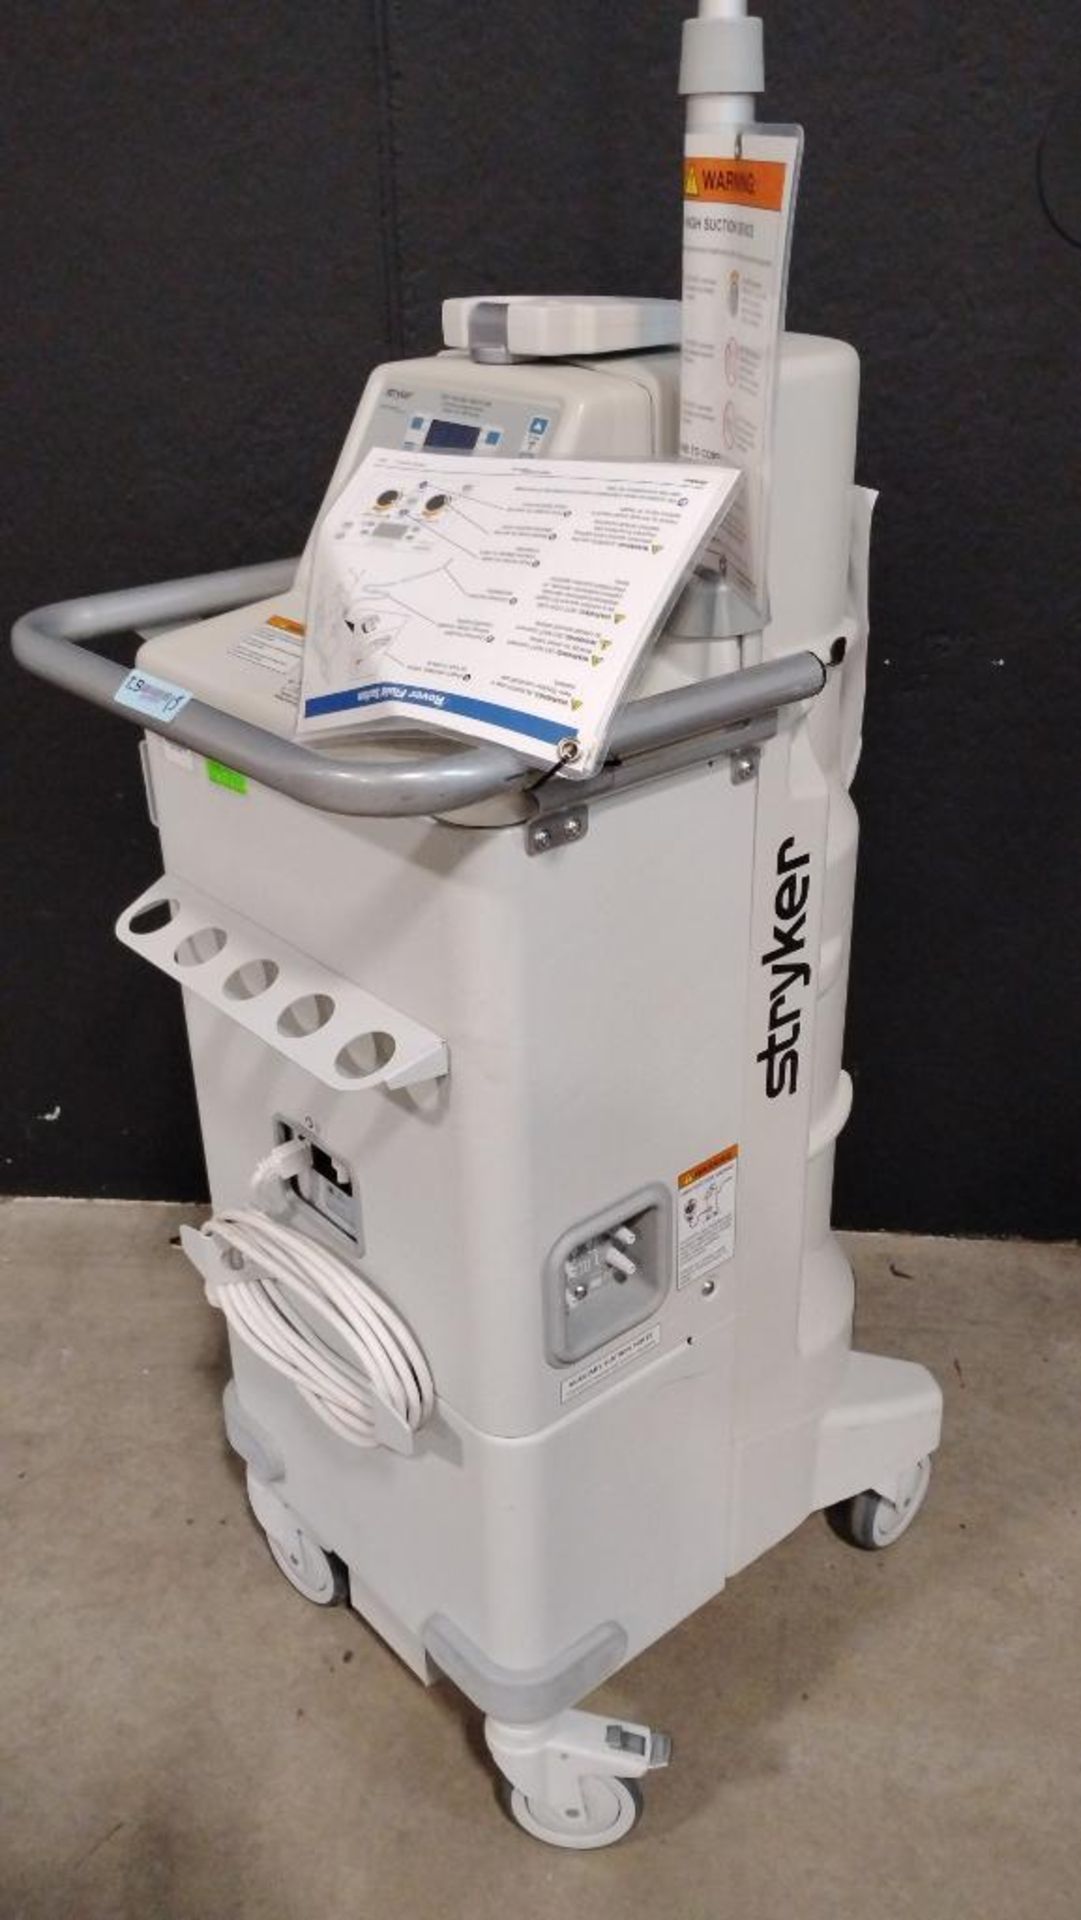 STRYKER NEPTUNE 2 ULTRA HIGH VACUUM/ HIGH FLOW CONTINOUS SURGICAL SUCTION UNIT - Image 3 of 5